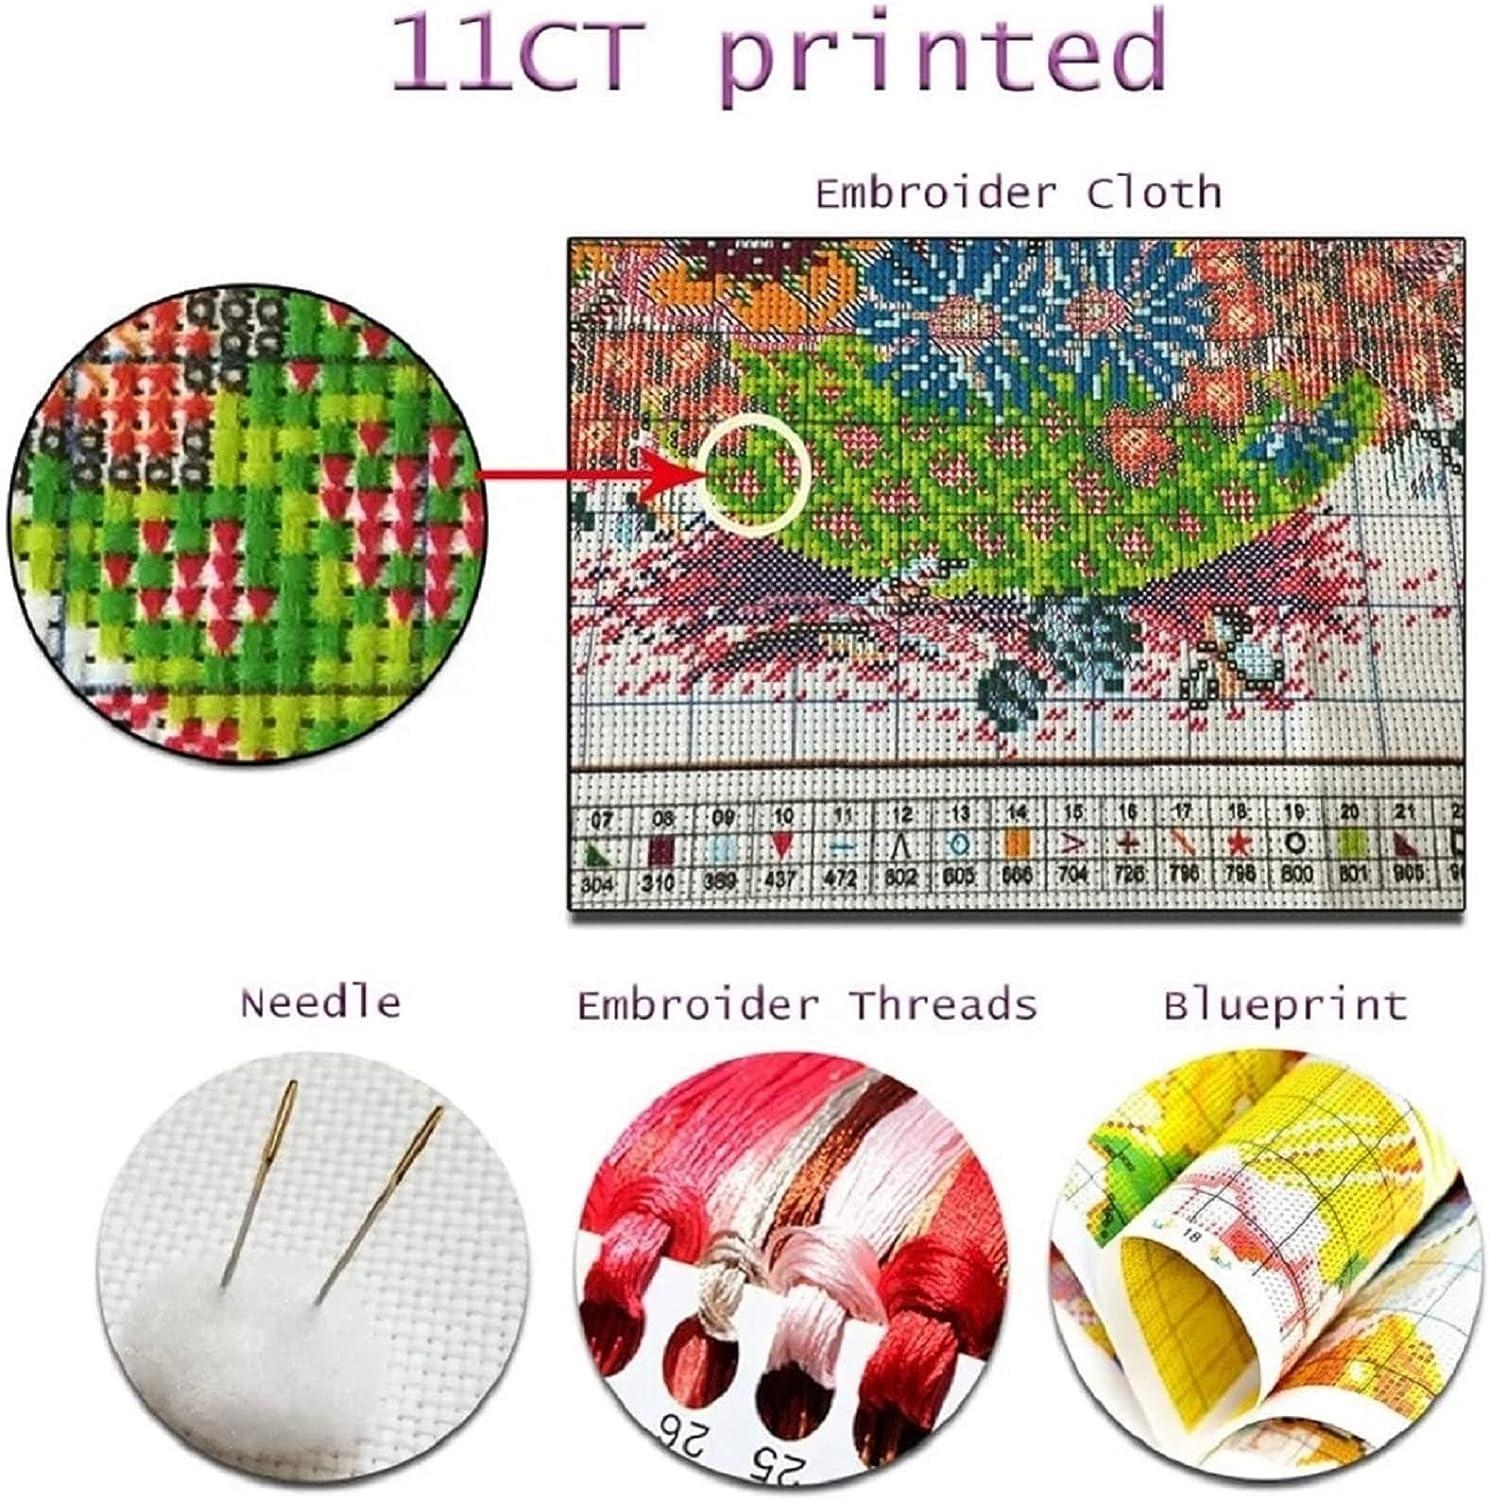 Findvoor Stamped Cross Stitch Kits for Beginners Full Range of Cross  Stitching Embroidery Pattern for Kids or Adults, 11CT DIY Needlepoint  Embroidery